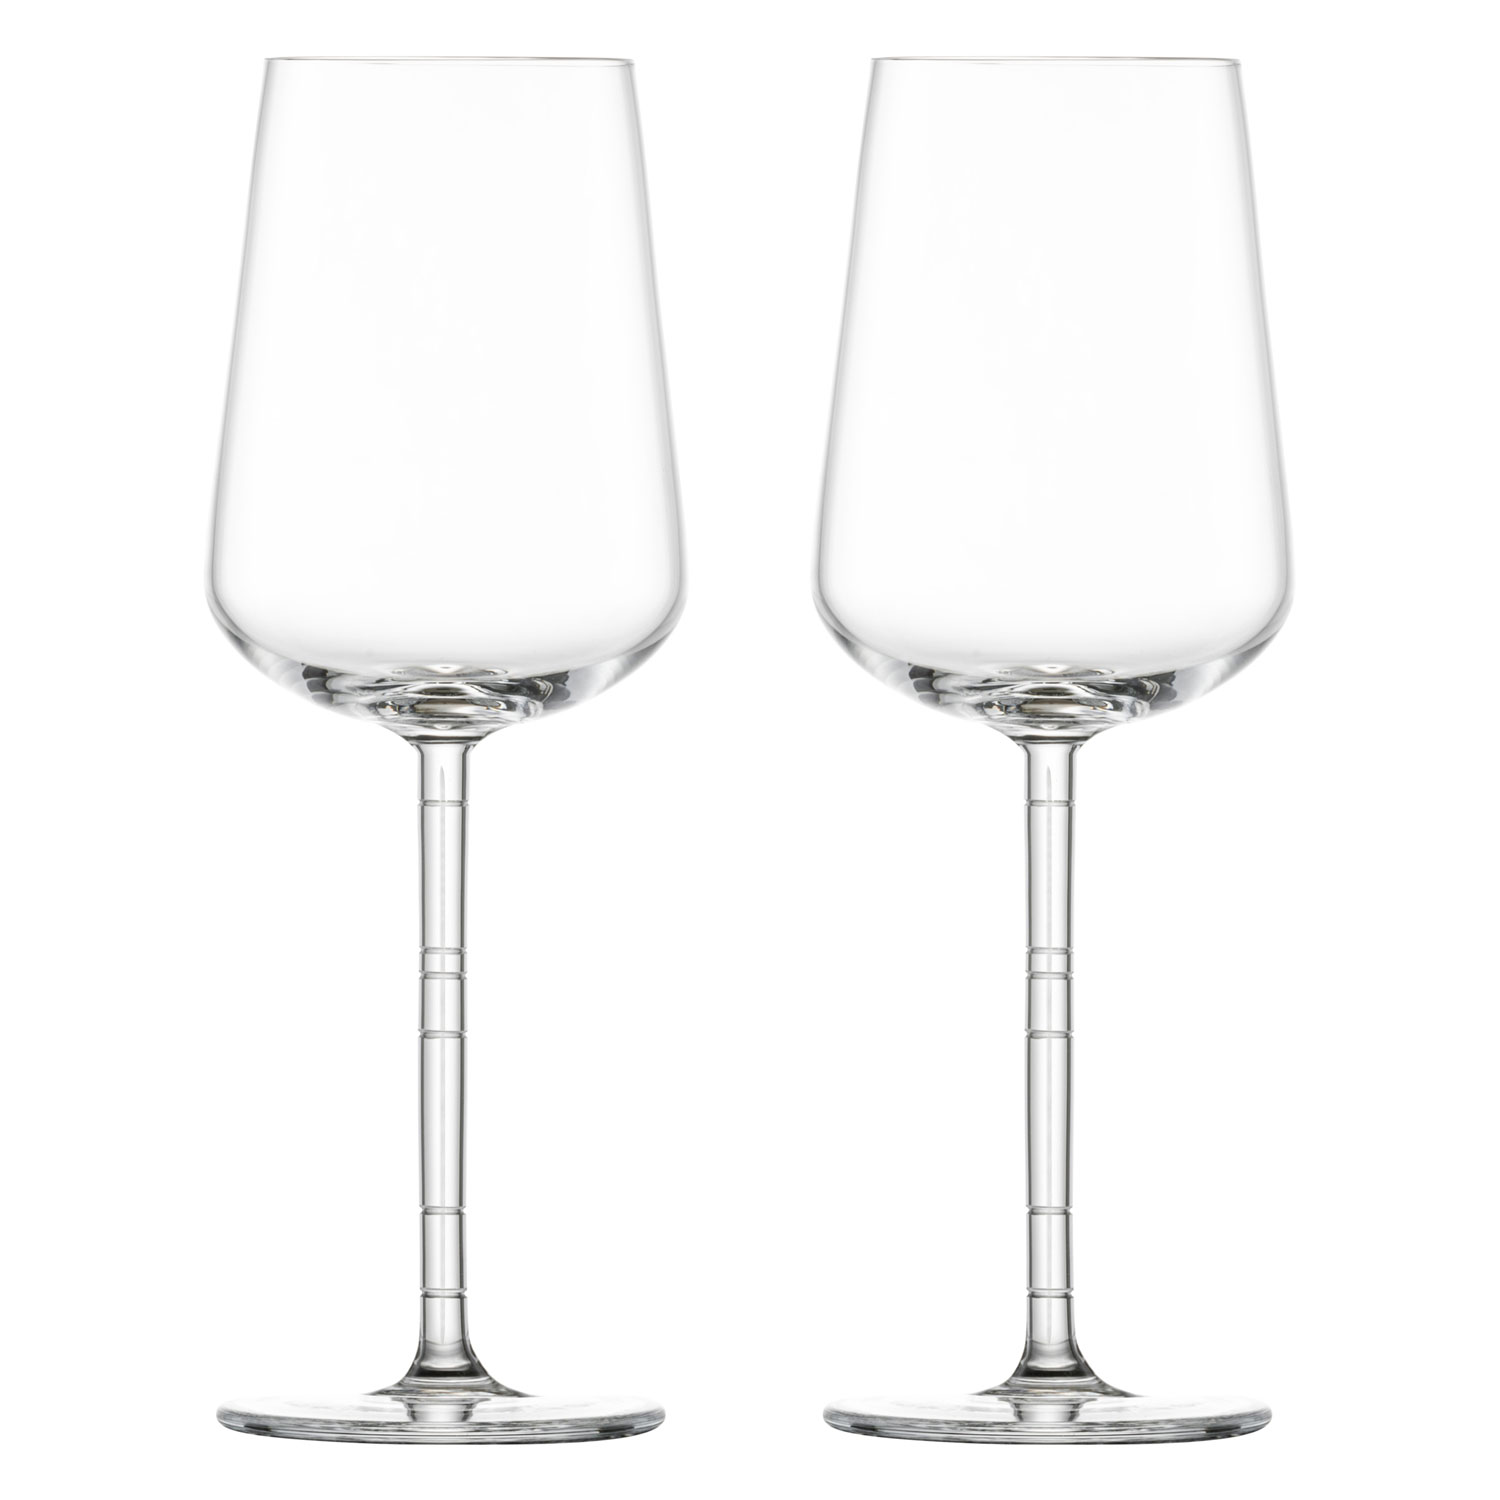 Celebration Deluxe White Wine Glass Stripes 2-pack, 40 cl